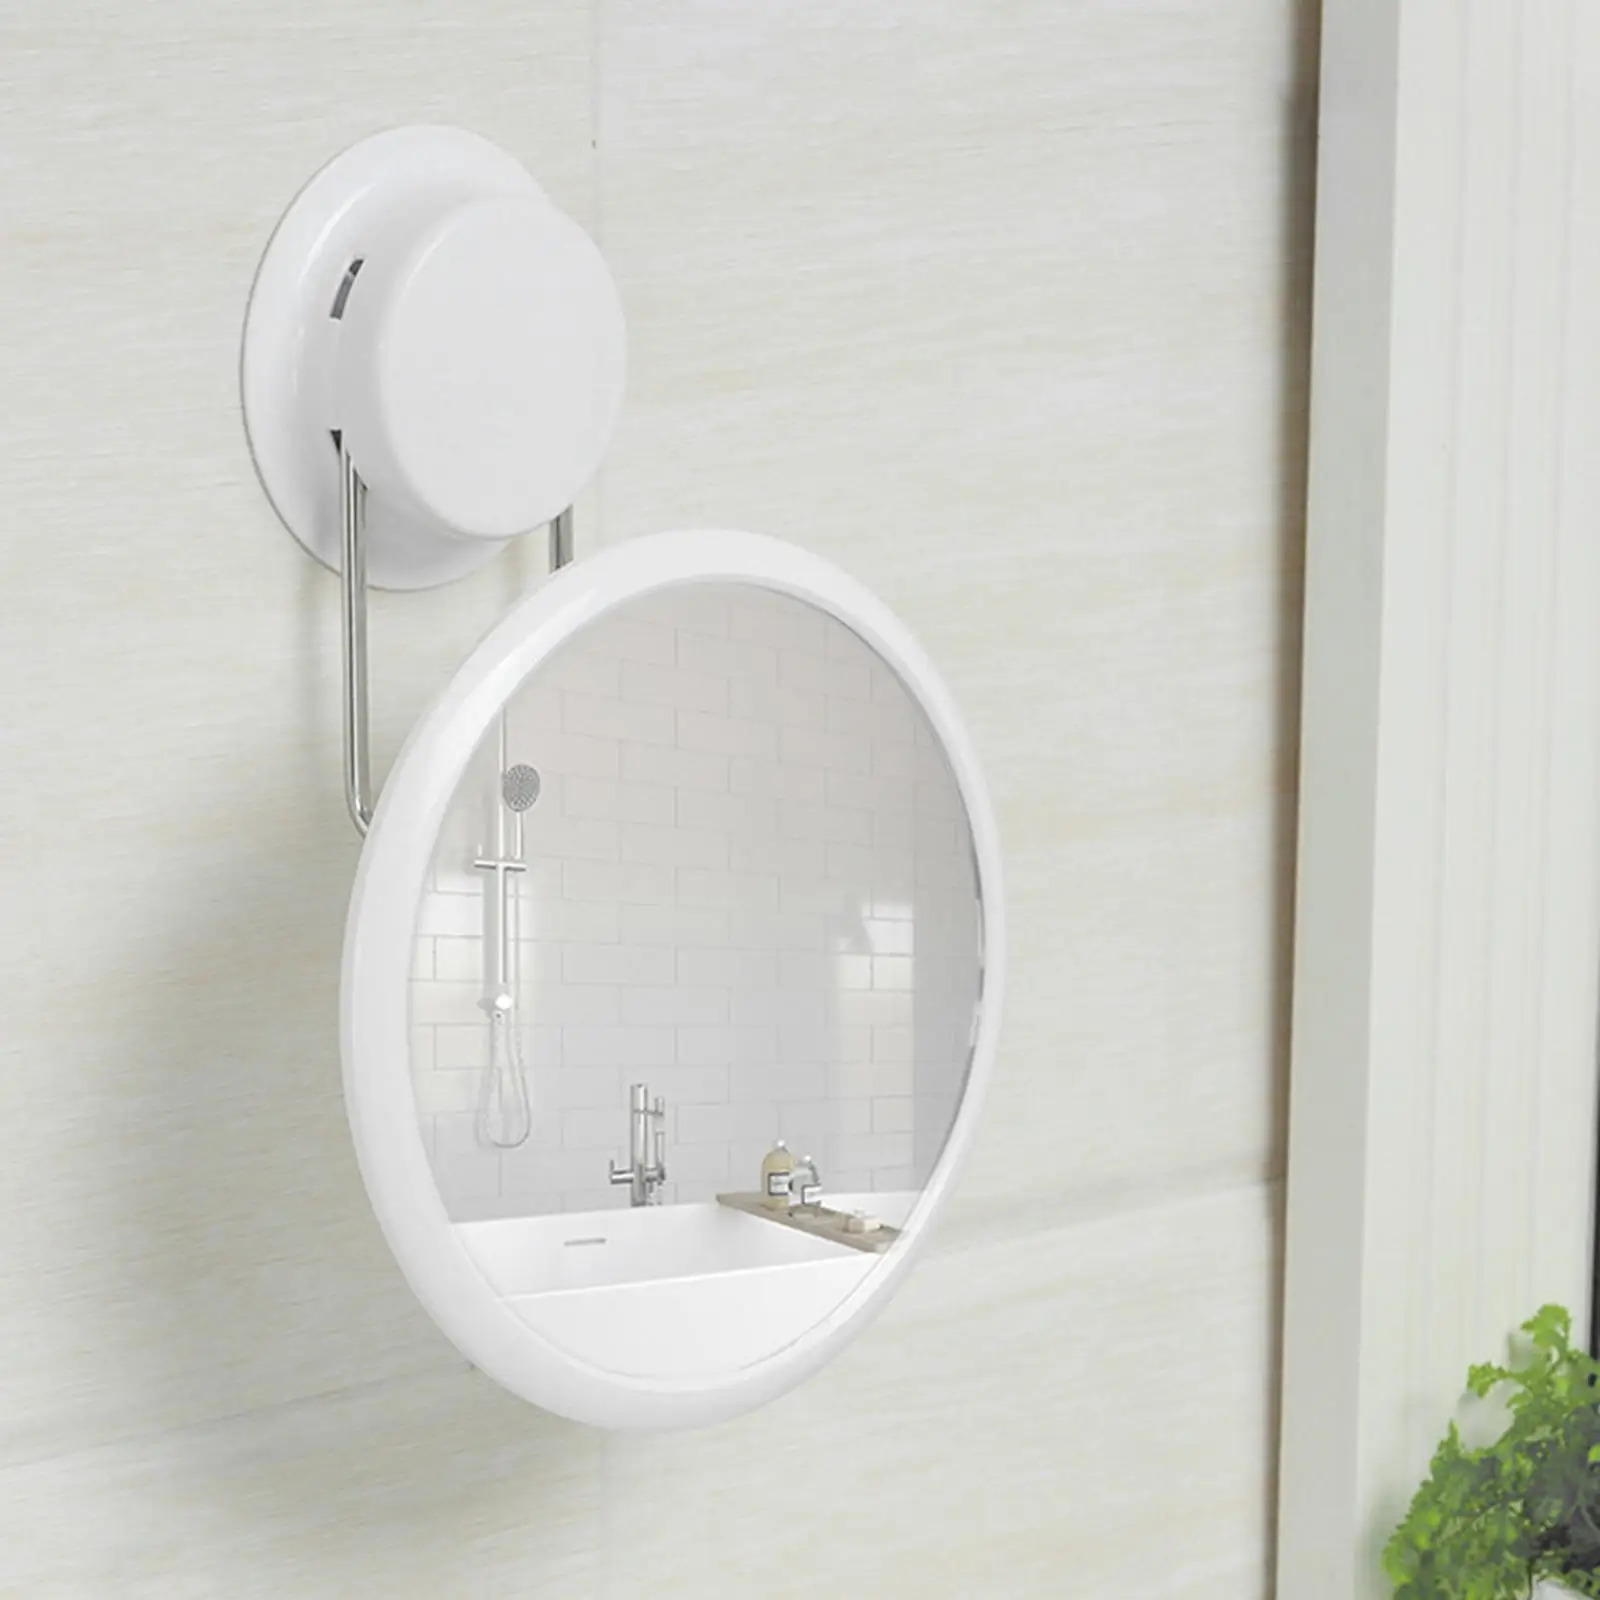 Wall Suction Bathroom Mirror Foldable Rotating Free Adjustment Beauty Mirror No Drills Easy to Clean Vanity Mirror Multi Purpose